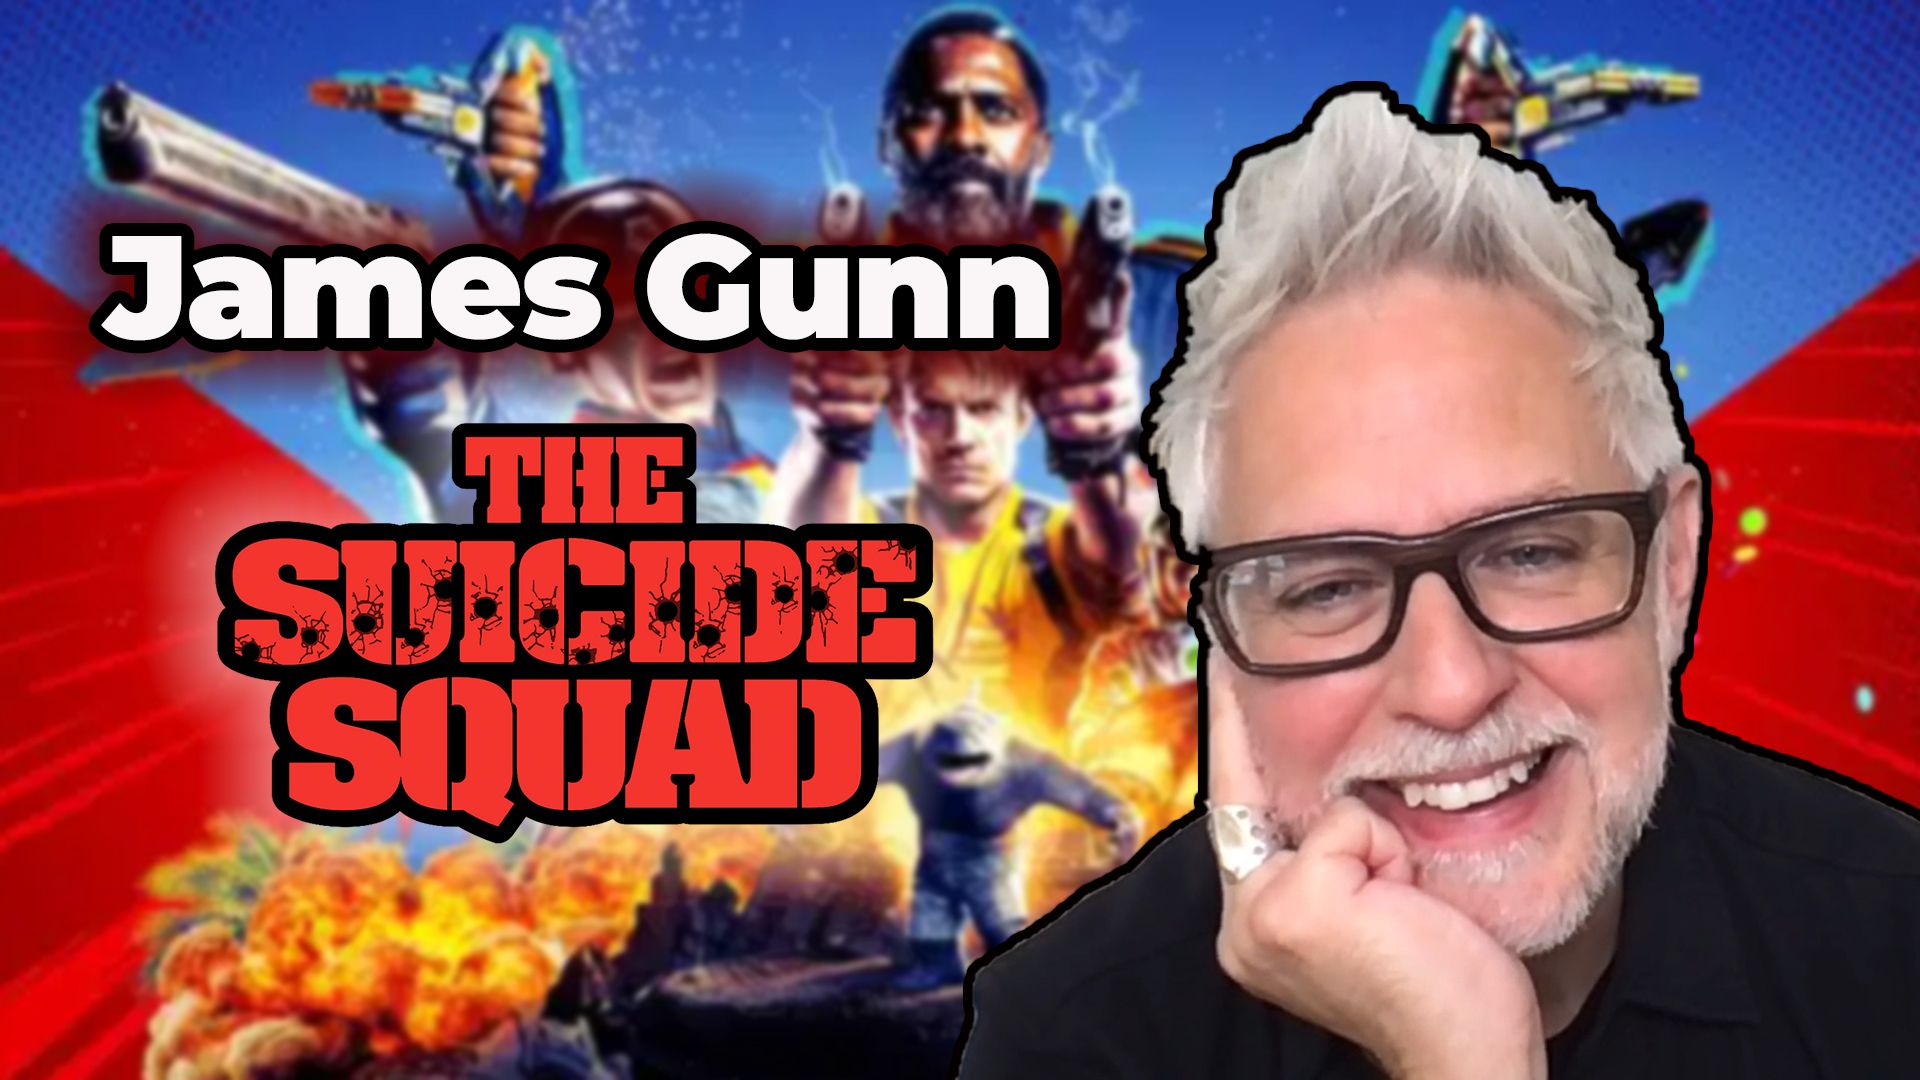 Official Synopsis For James Gunn's THE SUICIDE SQUAD. UPDATE: Red